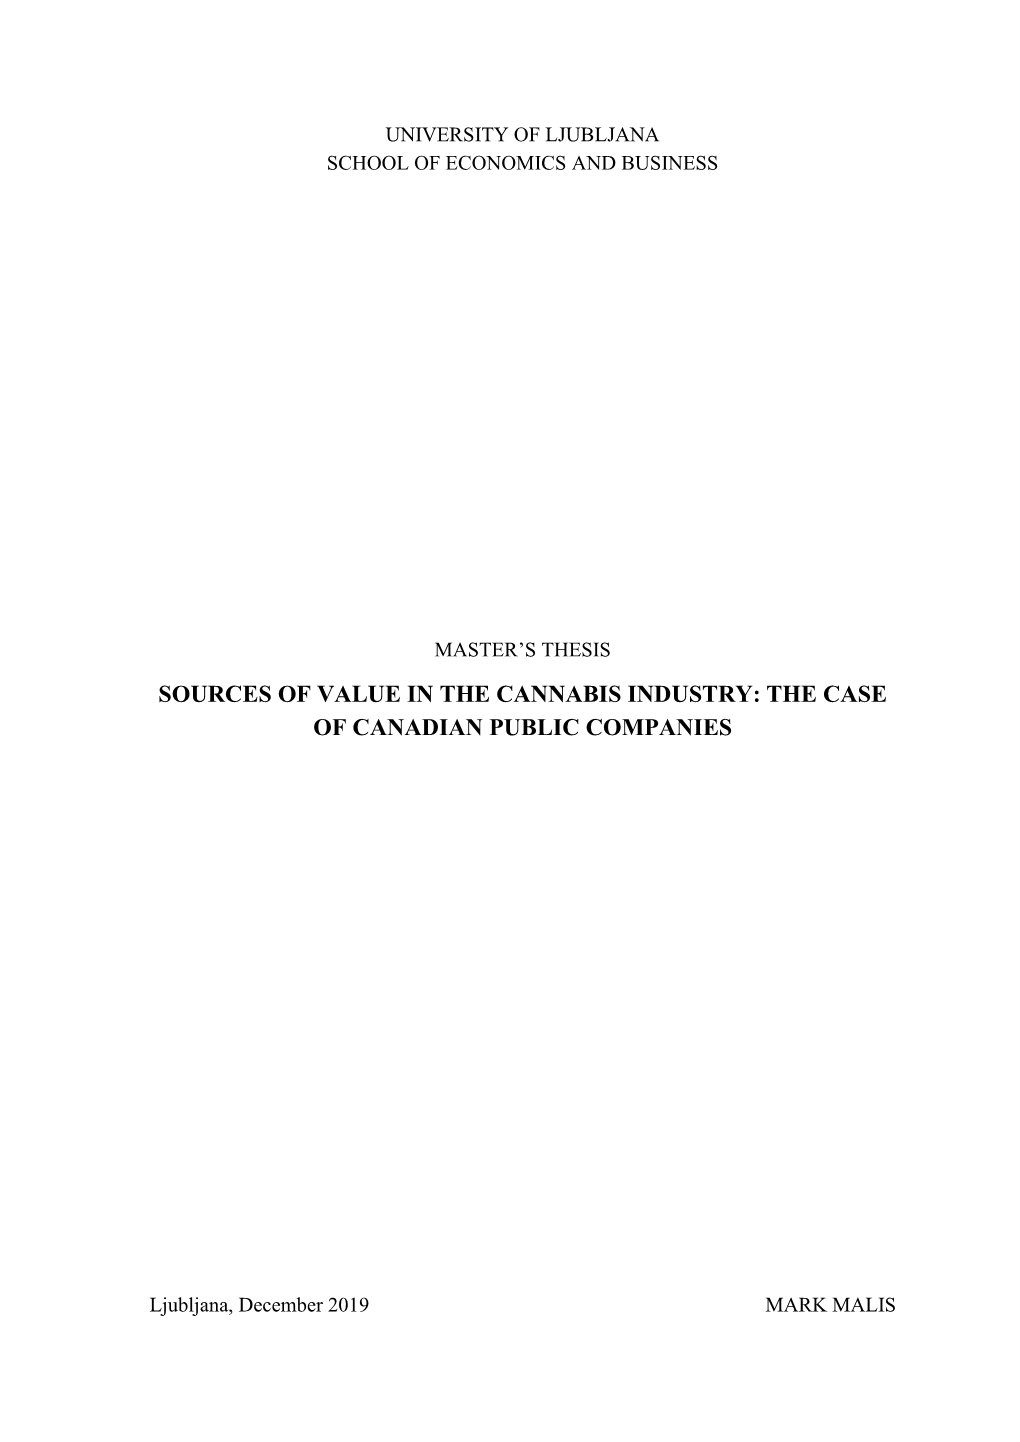 Sources of Value in the Cannabis Industry: the Case of Canadian Public Companies